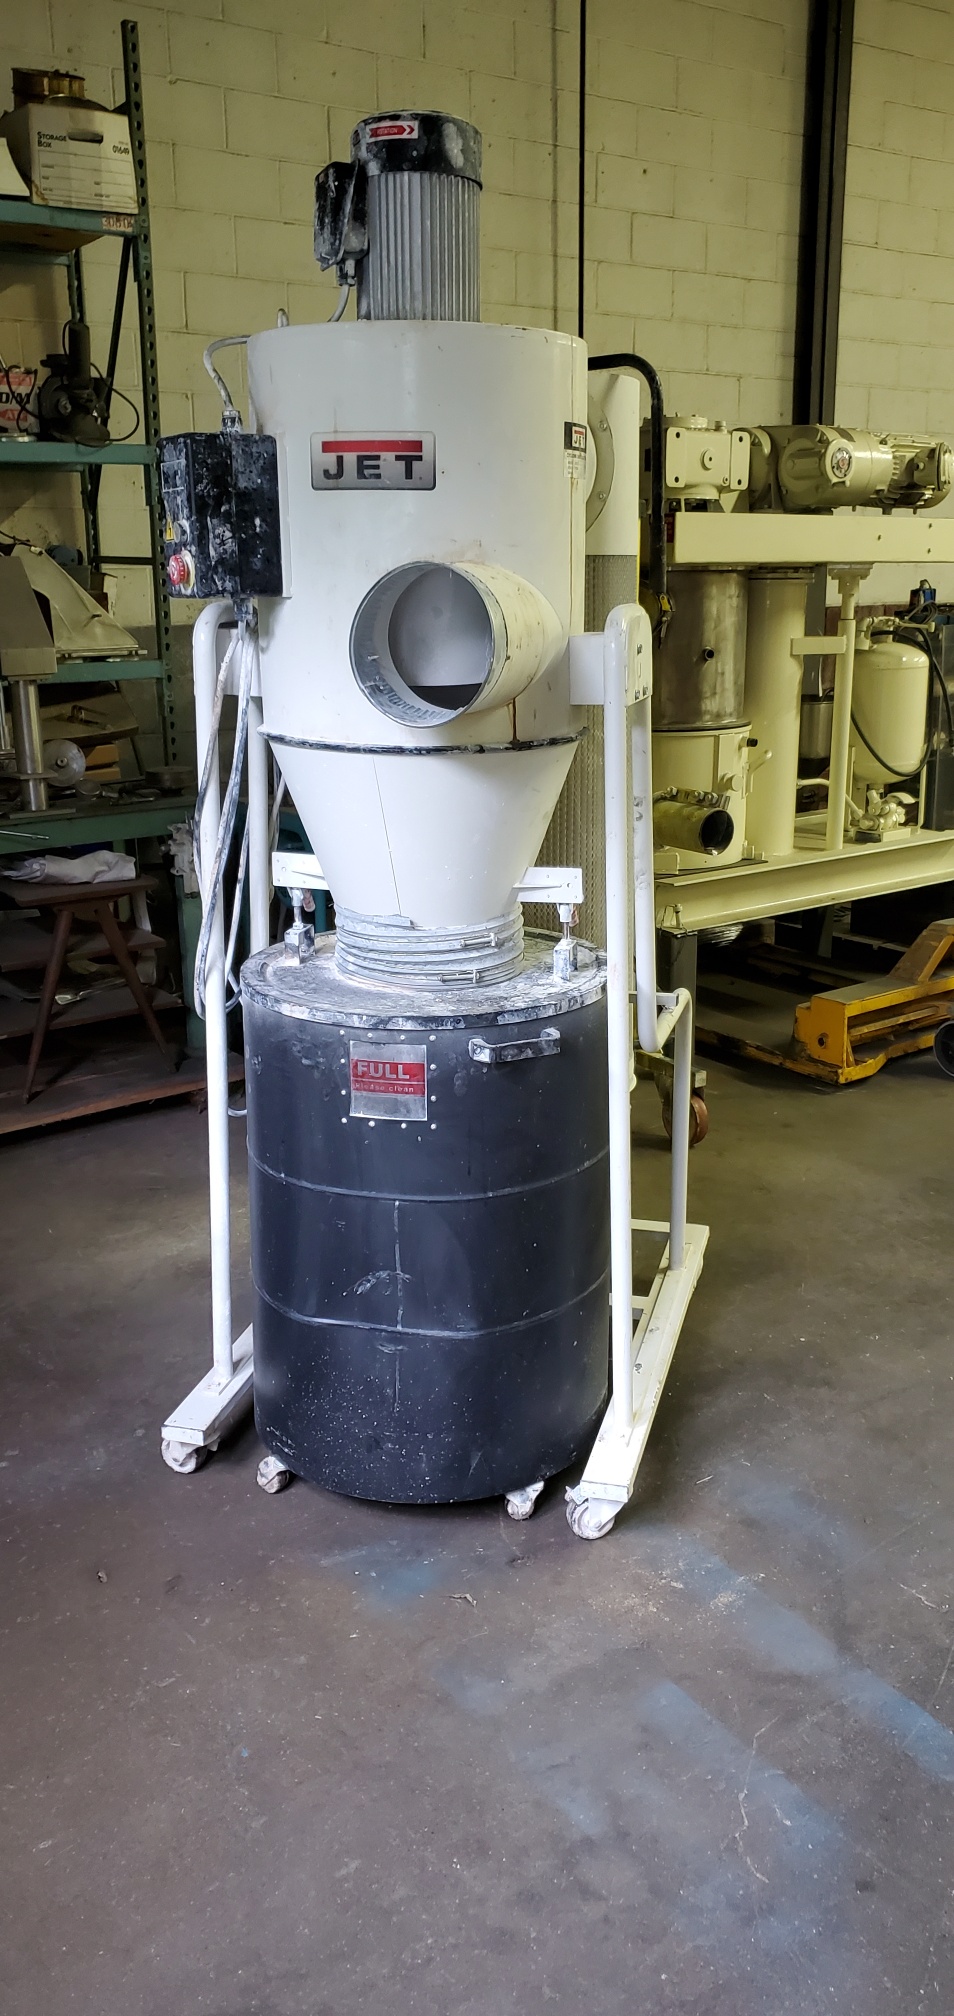 1240 CFM Jet Model JCDC-3 Vertical Cyclone Dust Collector,Portable